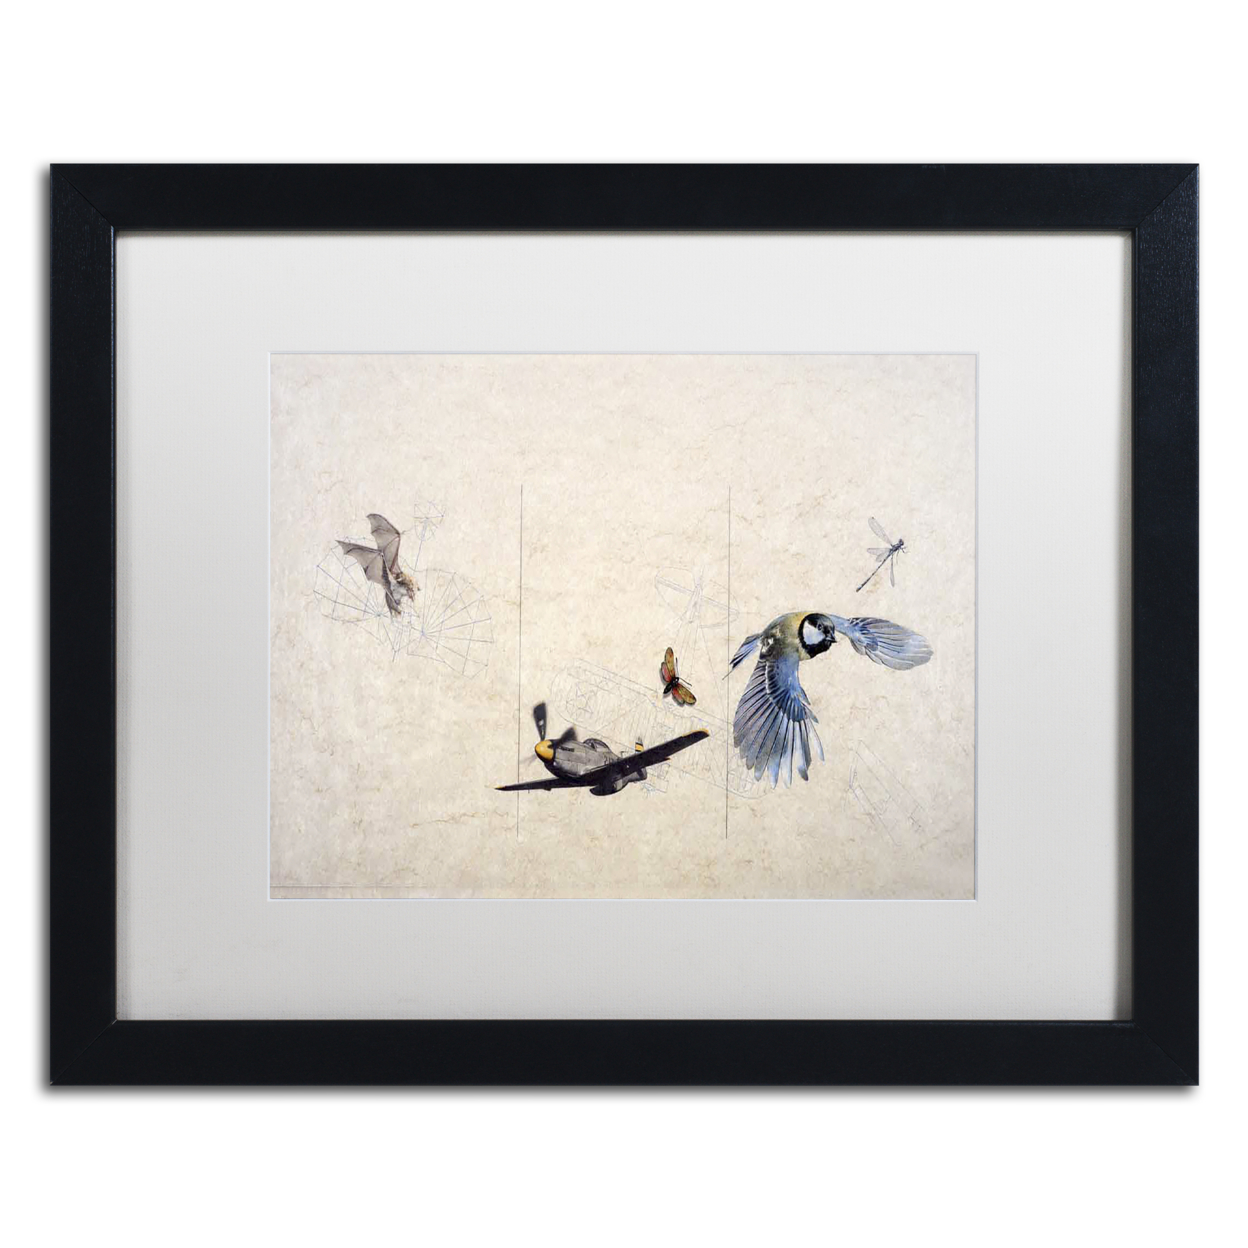 Nick Bantock 'Wings' Black Wooden Framed Art 18 X 22 Inches